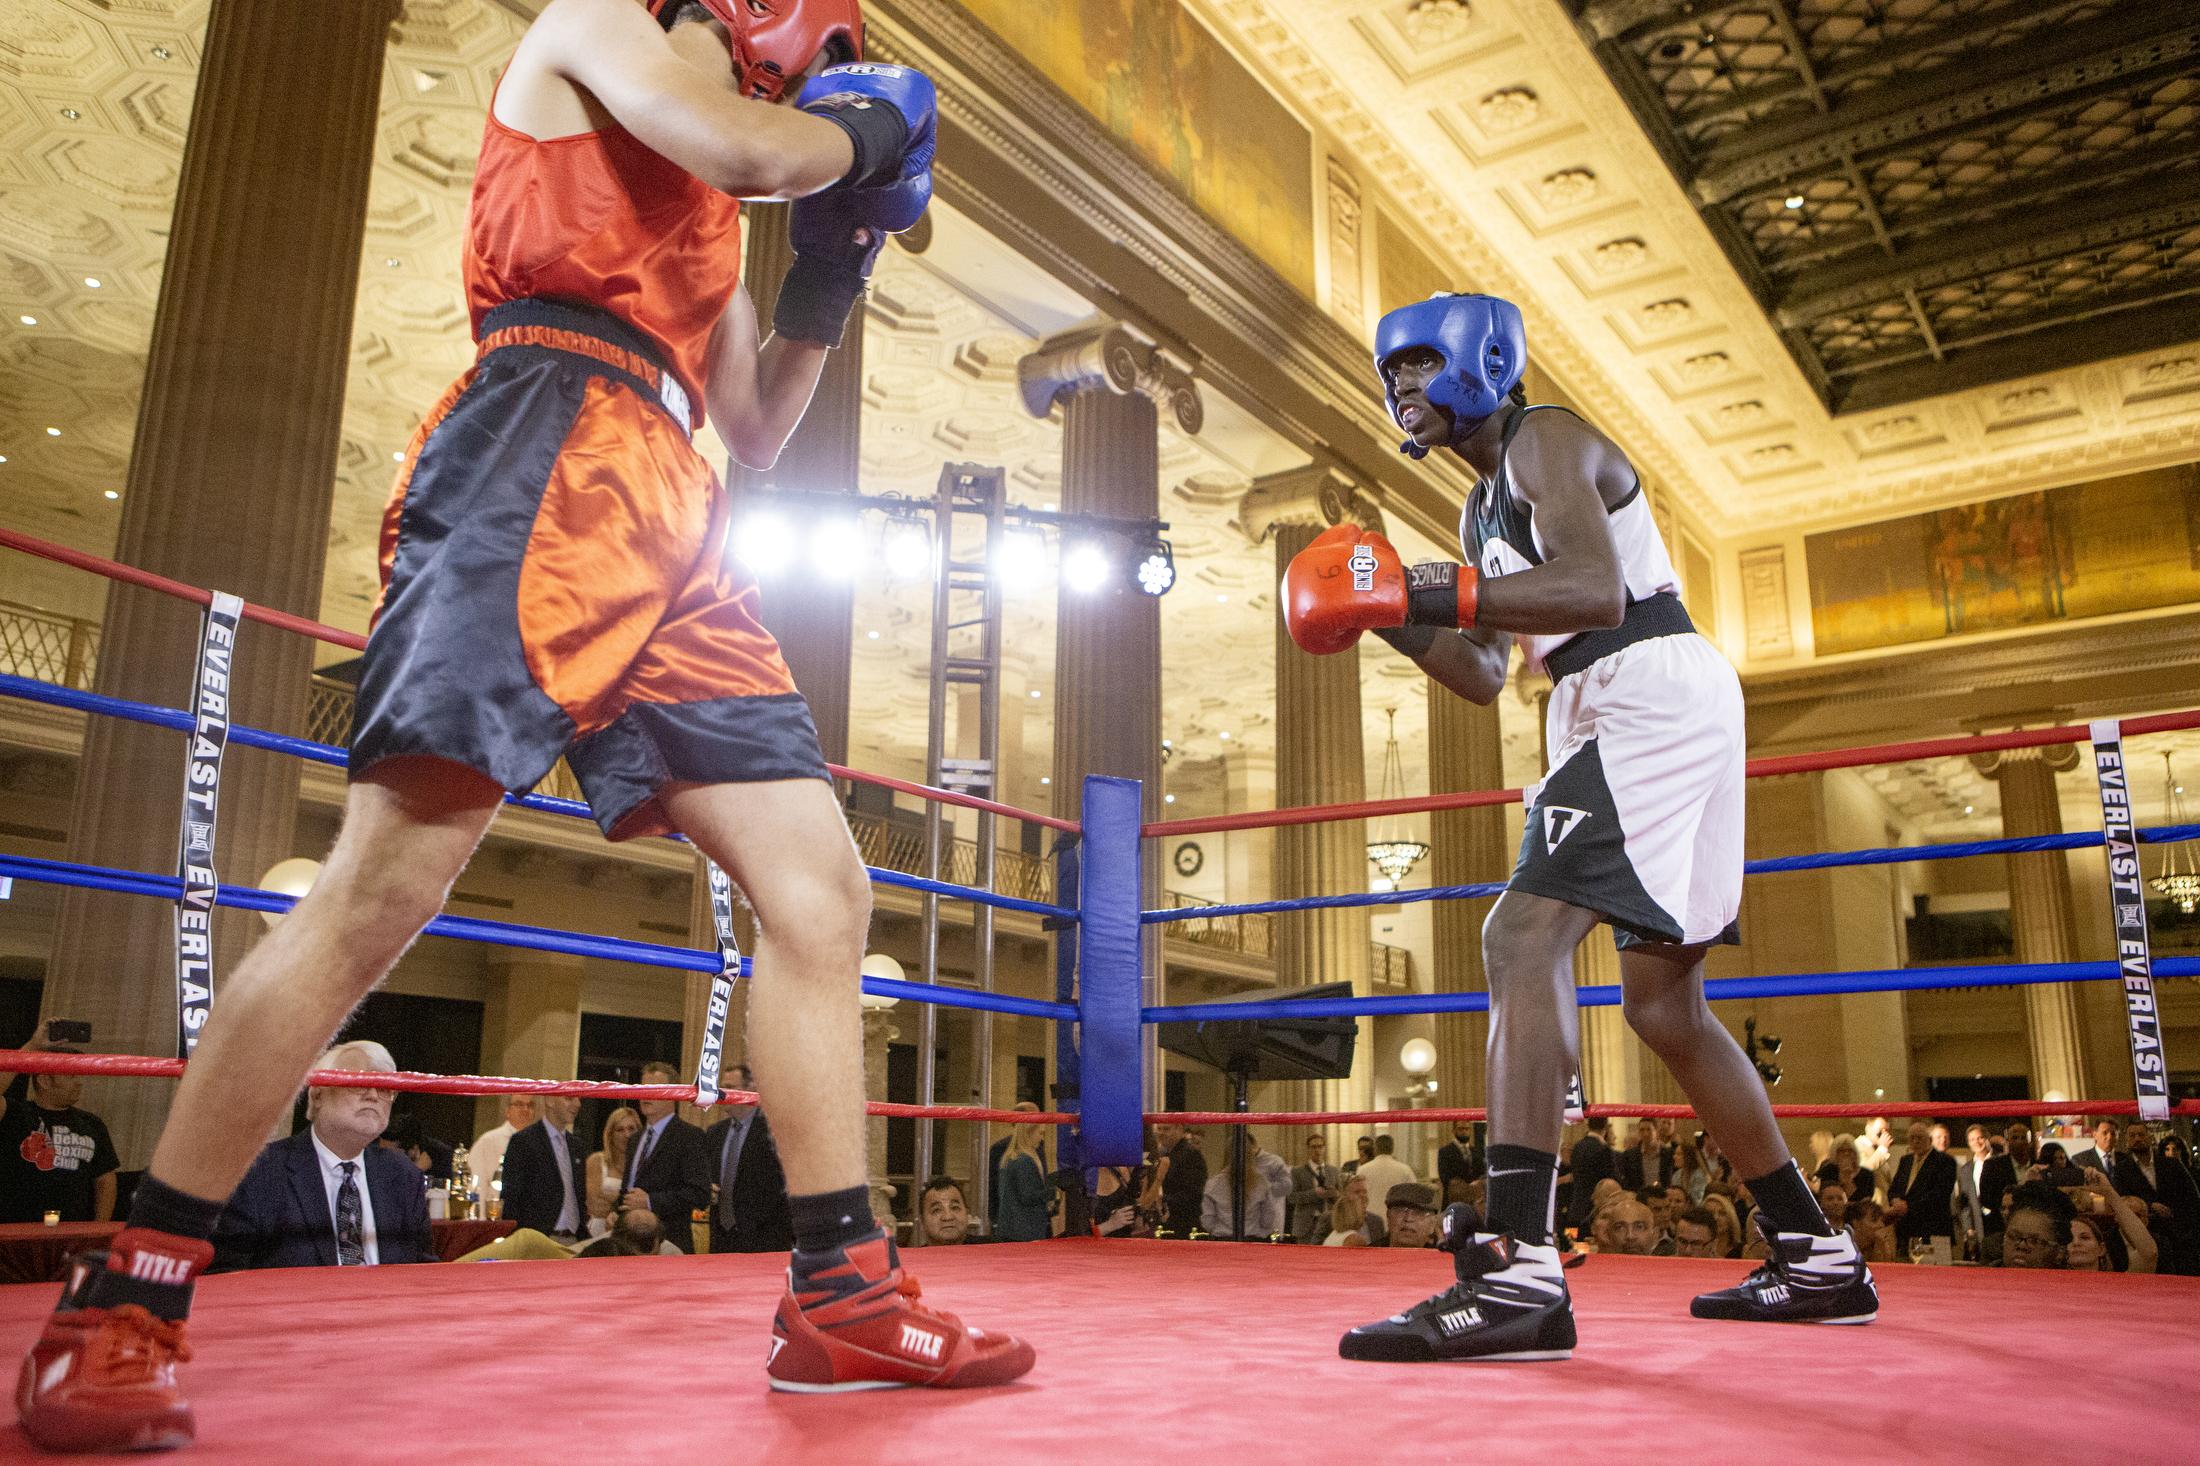 10 years in a boxing gym - Ivry boxing for the Respect 90 charity event in the Hall...